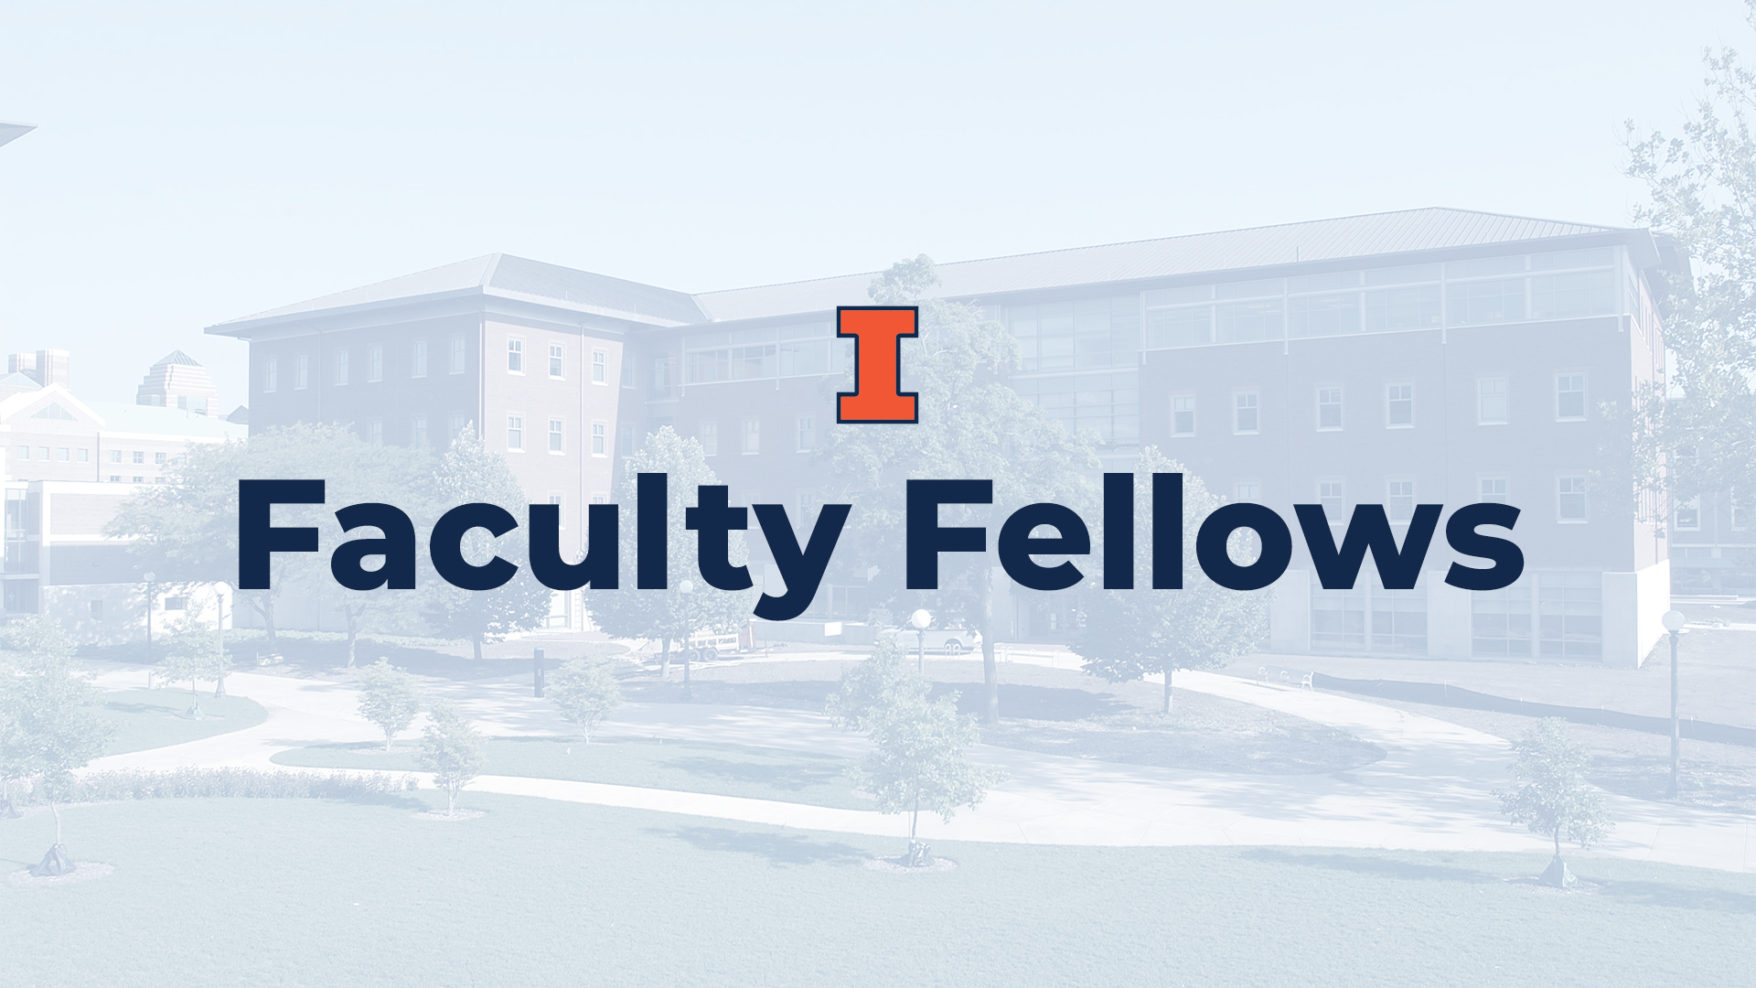 Greyed out image of NCSA building, with the text 'Faculty Fellows' with Illinois Block I logo